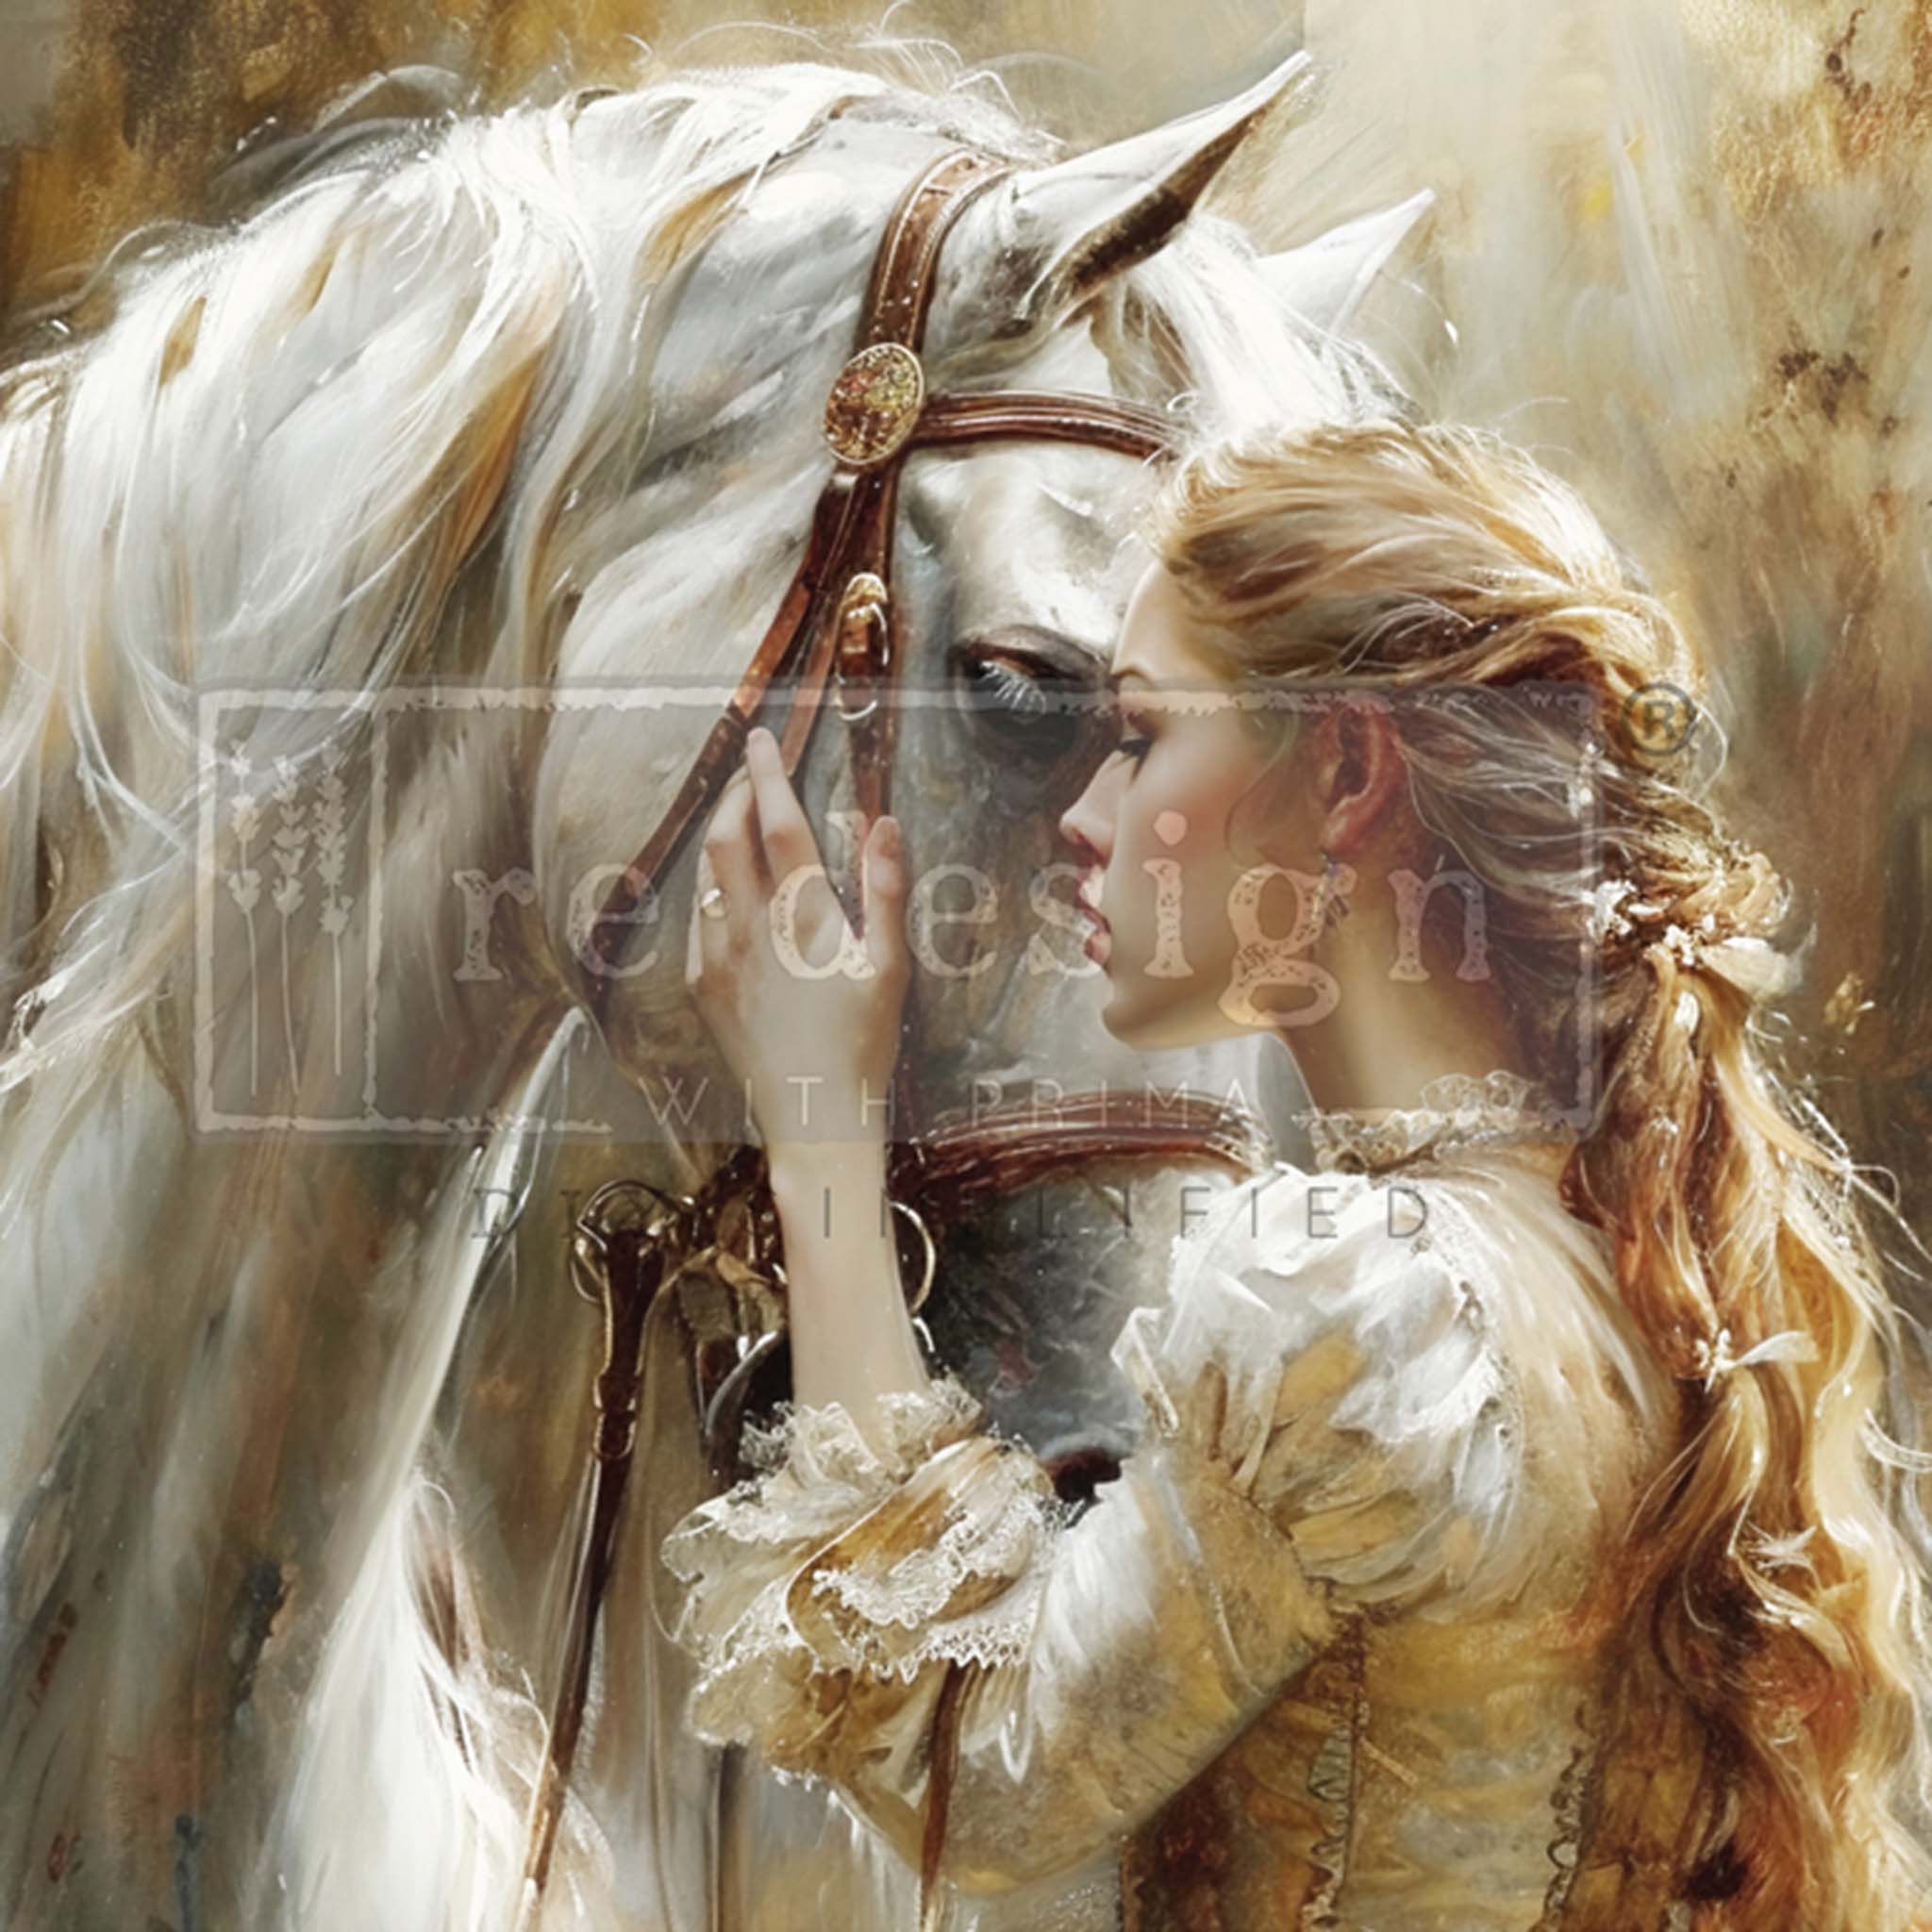 Close-up of an A1 fiber paper design featuring a royally dressed woman caressing a stunning white horse.